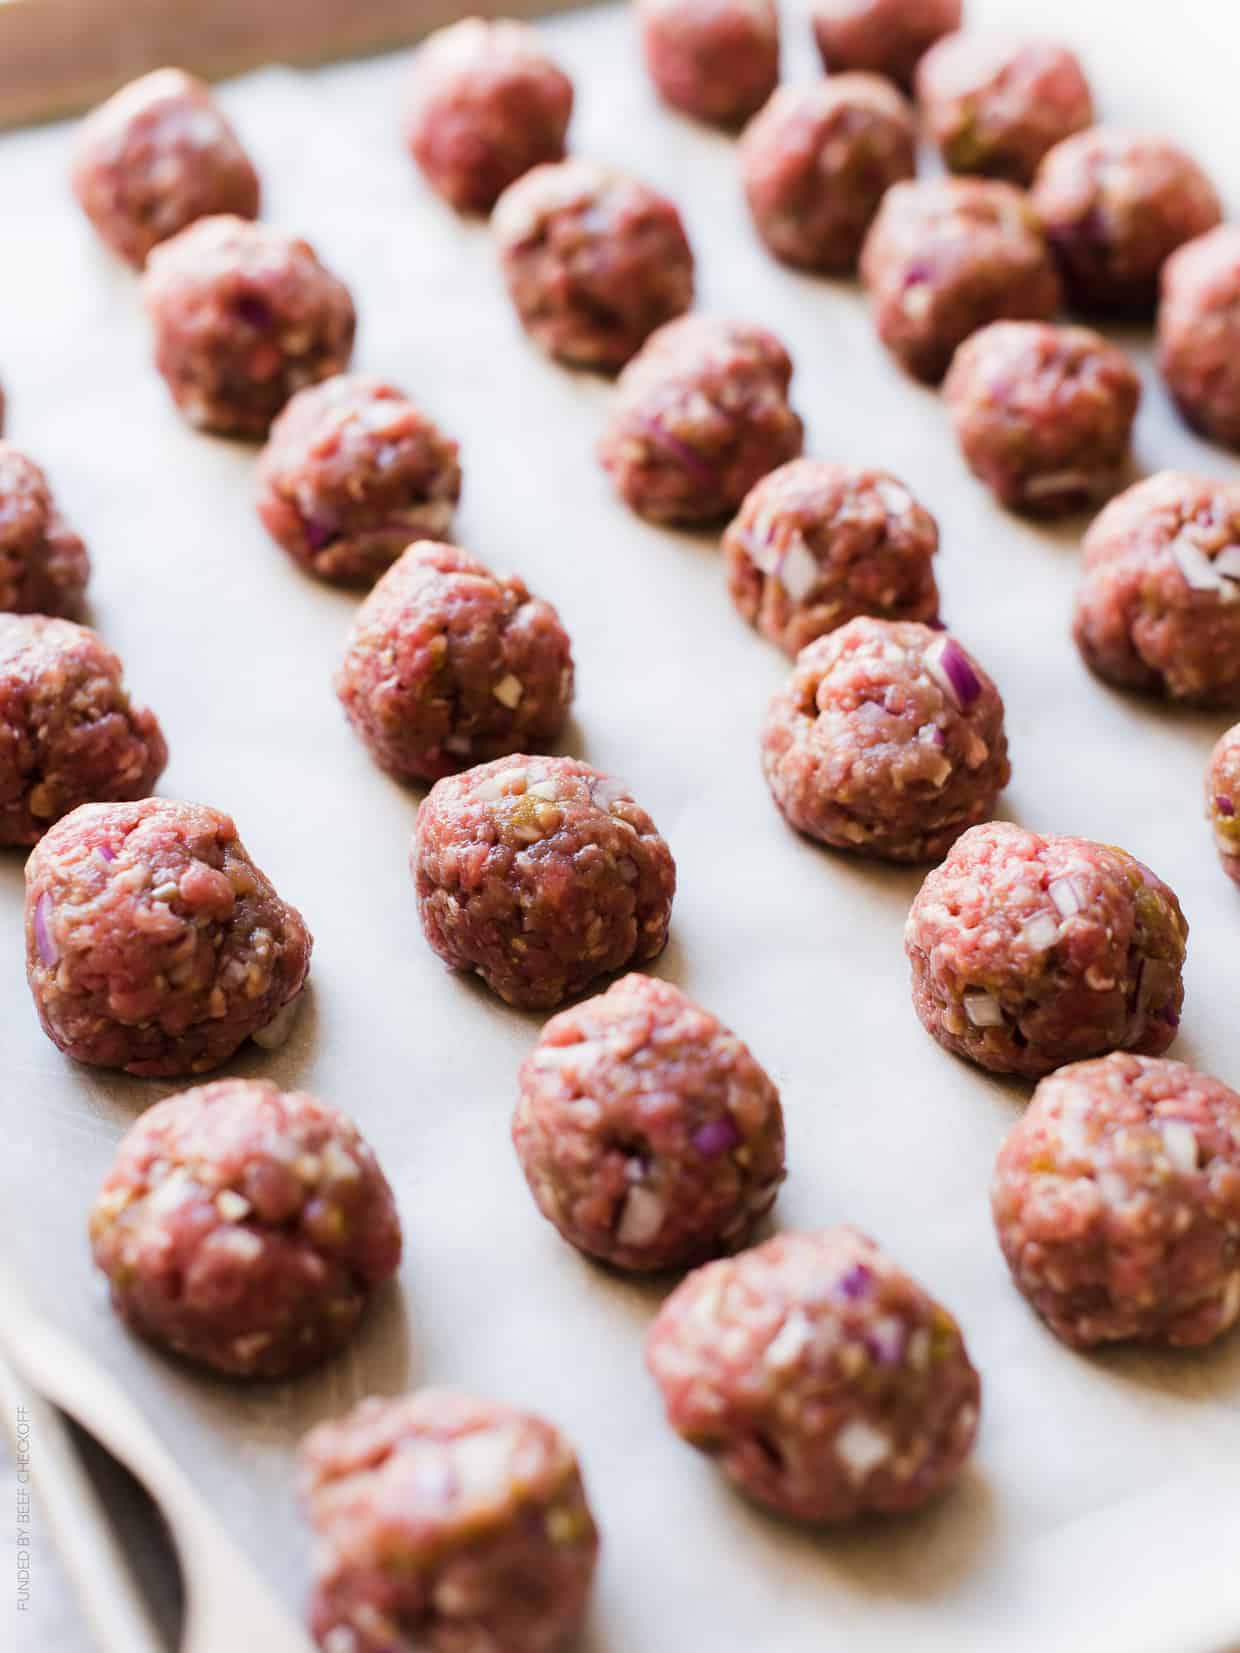 Progress shot of Thai-style Meatballs ready to be cooked.